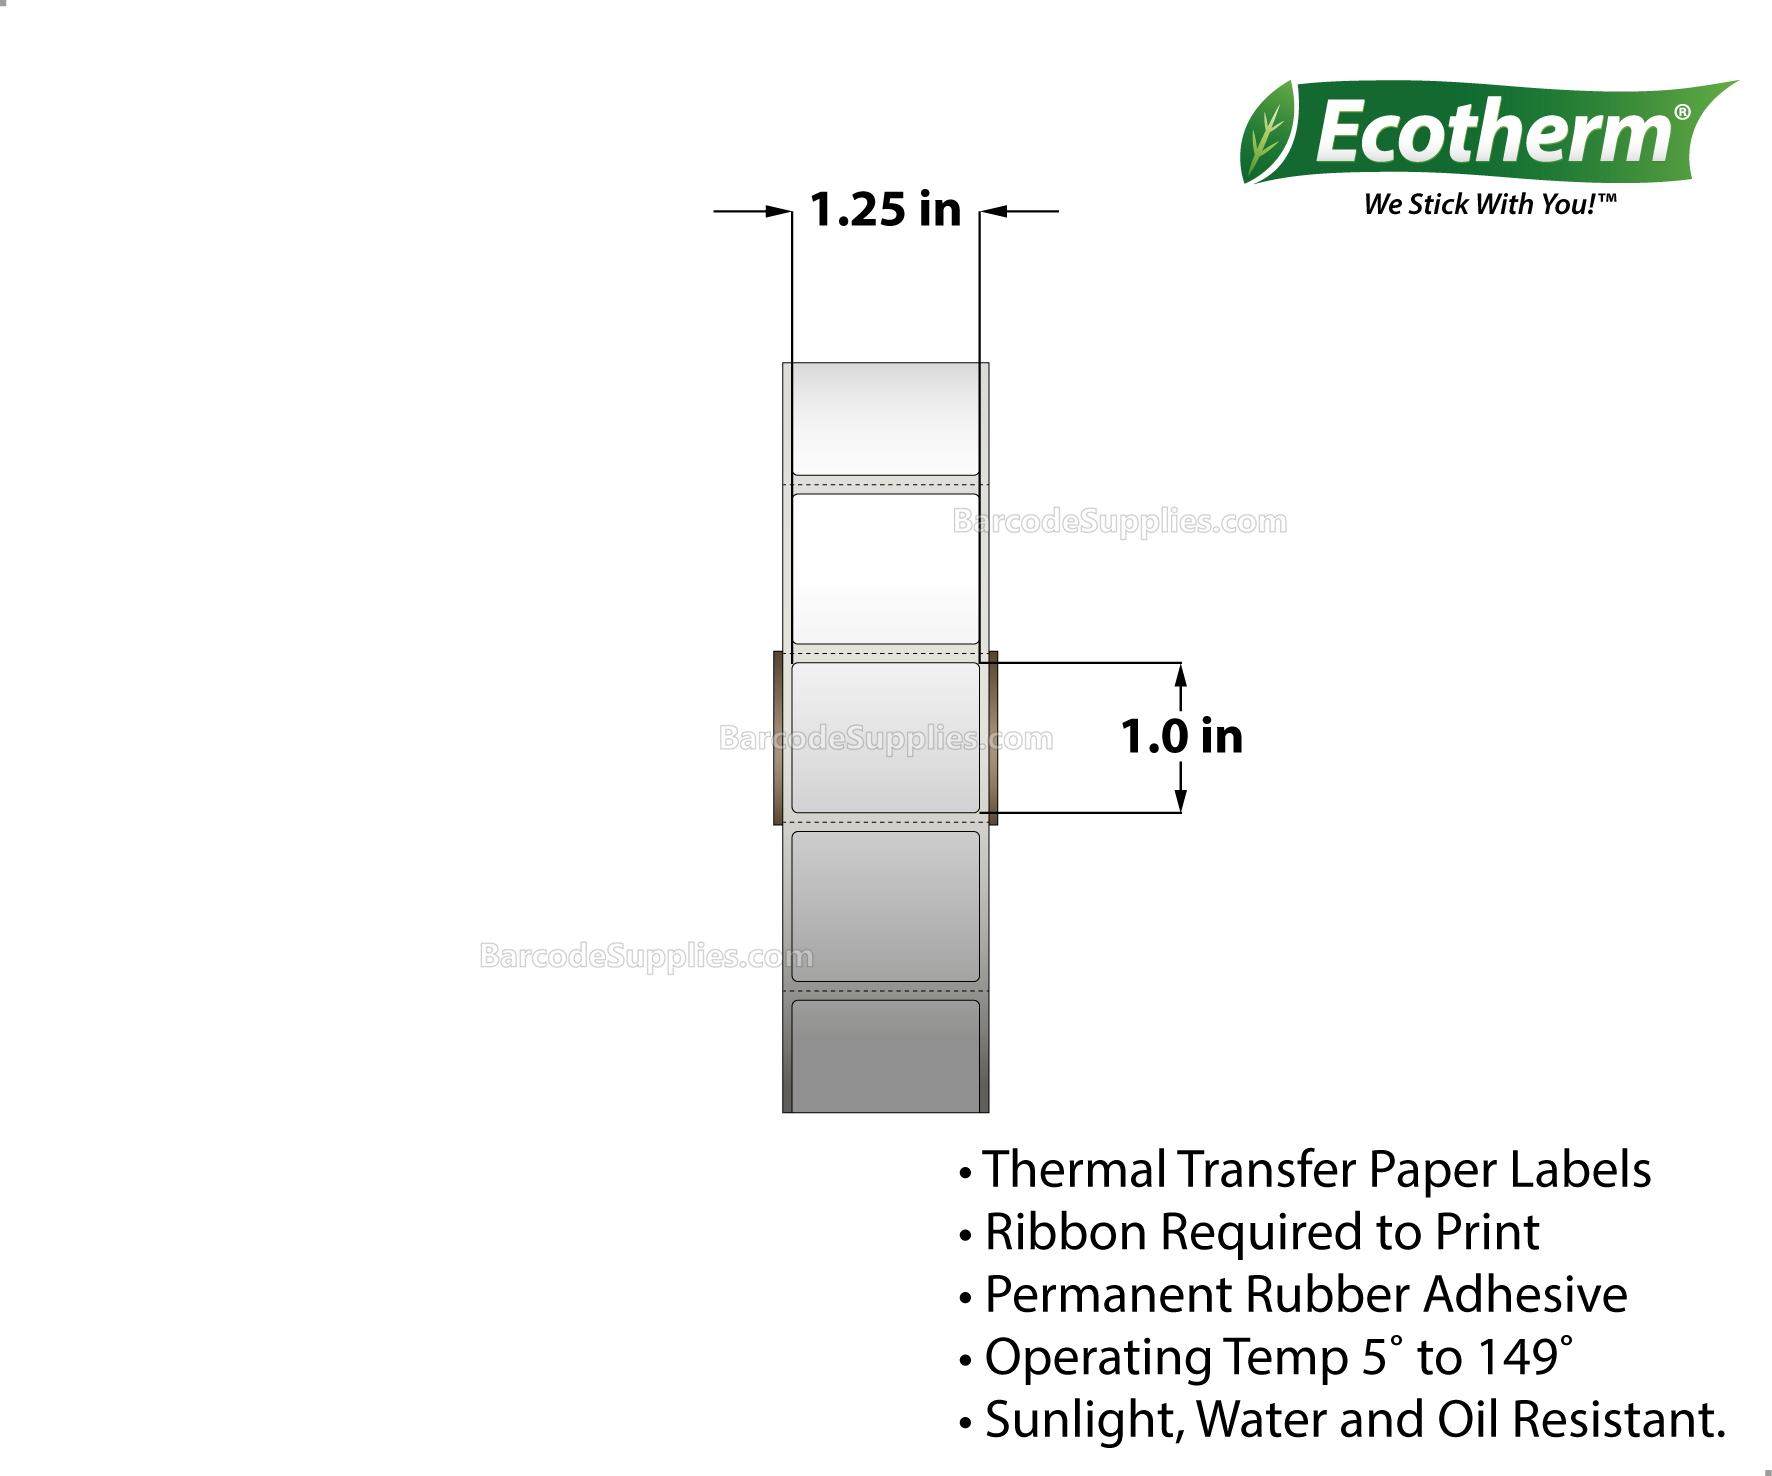 1.25 x 1 Thermal Transfer White Labels With Rubber Adhesive - Perforated - 2580 Labels Per Roll - Carton Of 6 Rolls - 15480 Labels Total - MPN: ECOTHERM25101-6